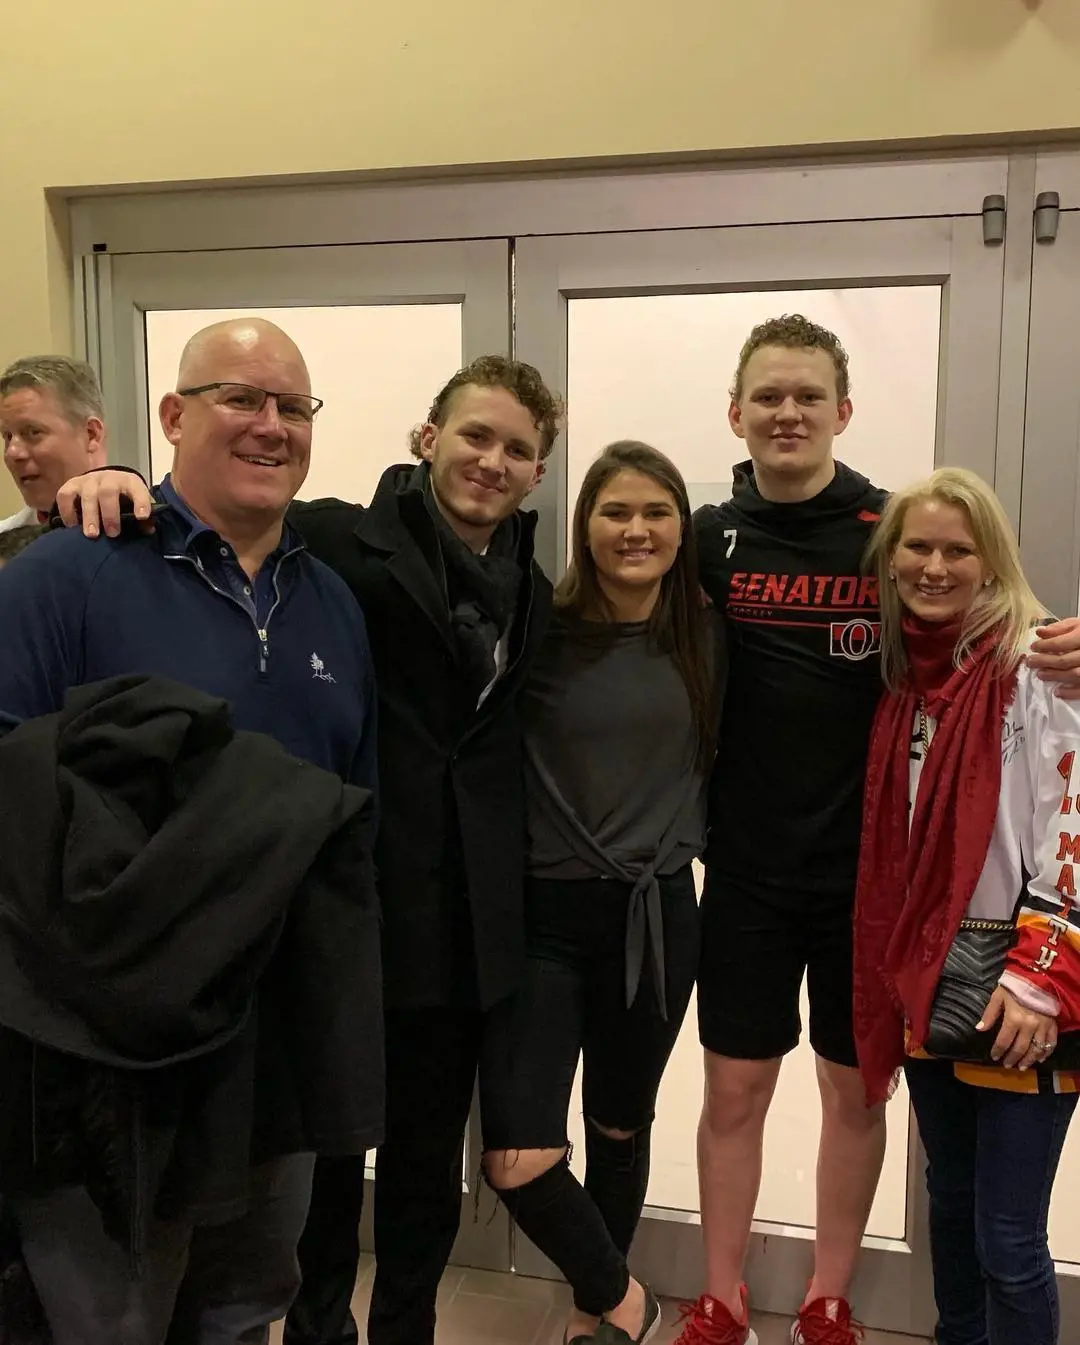 The Tkachuk family spent their weekend at the Canadian Tire Centre